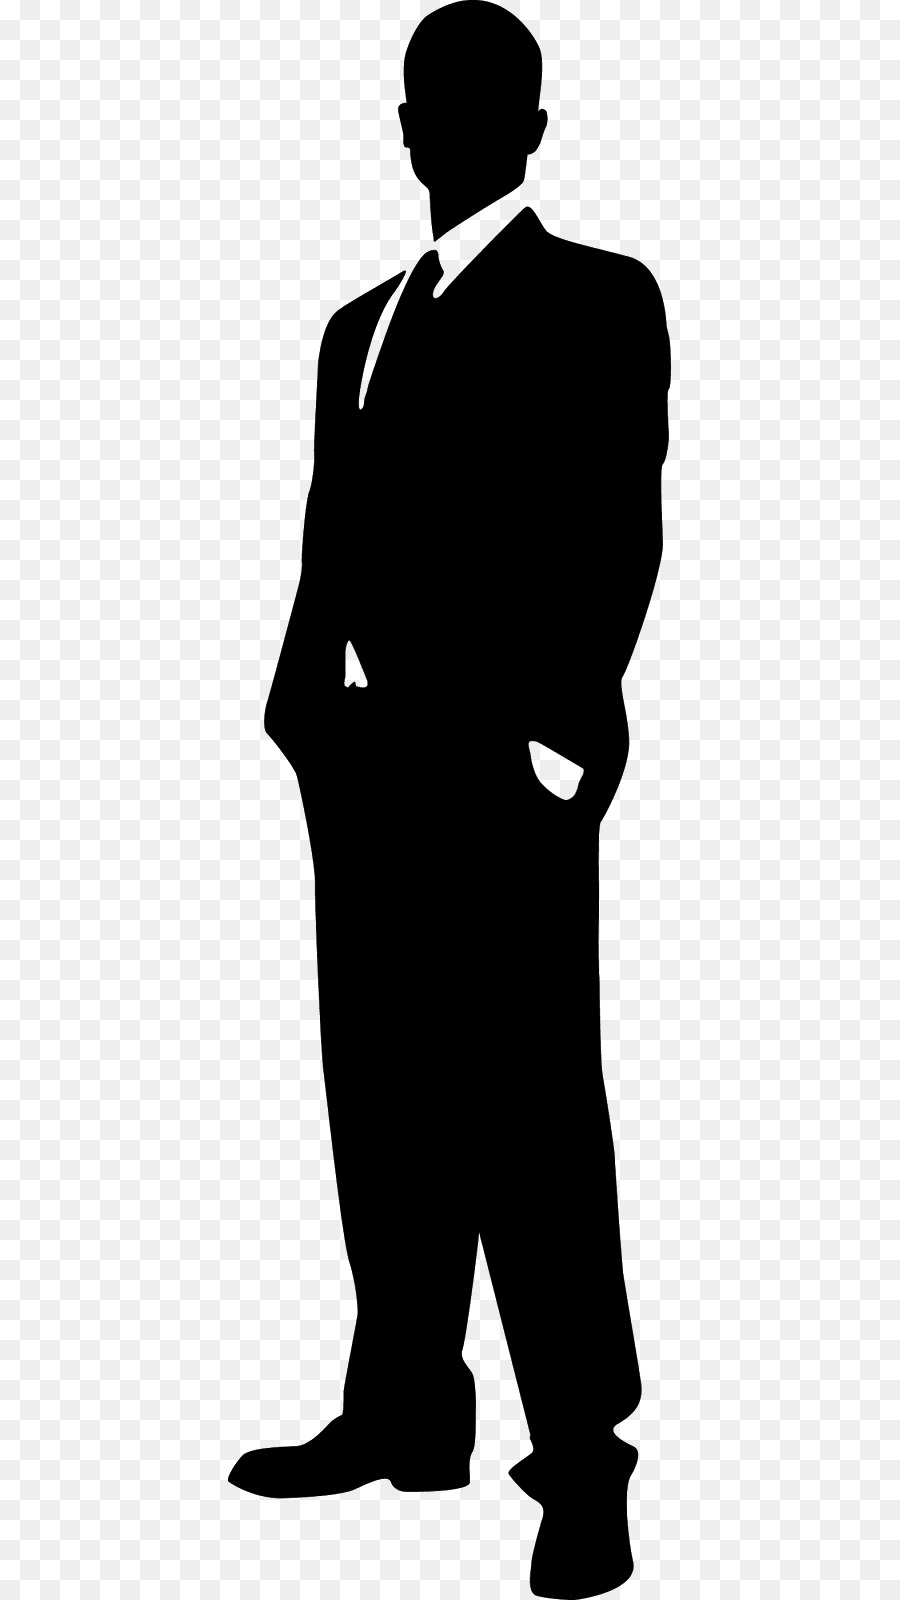 suit clipart sophisticated man suit sophisticated man transparent free for download on webstockreview 2020 suit clipart sophisticated man suit